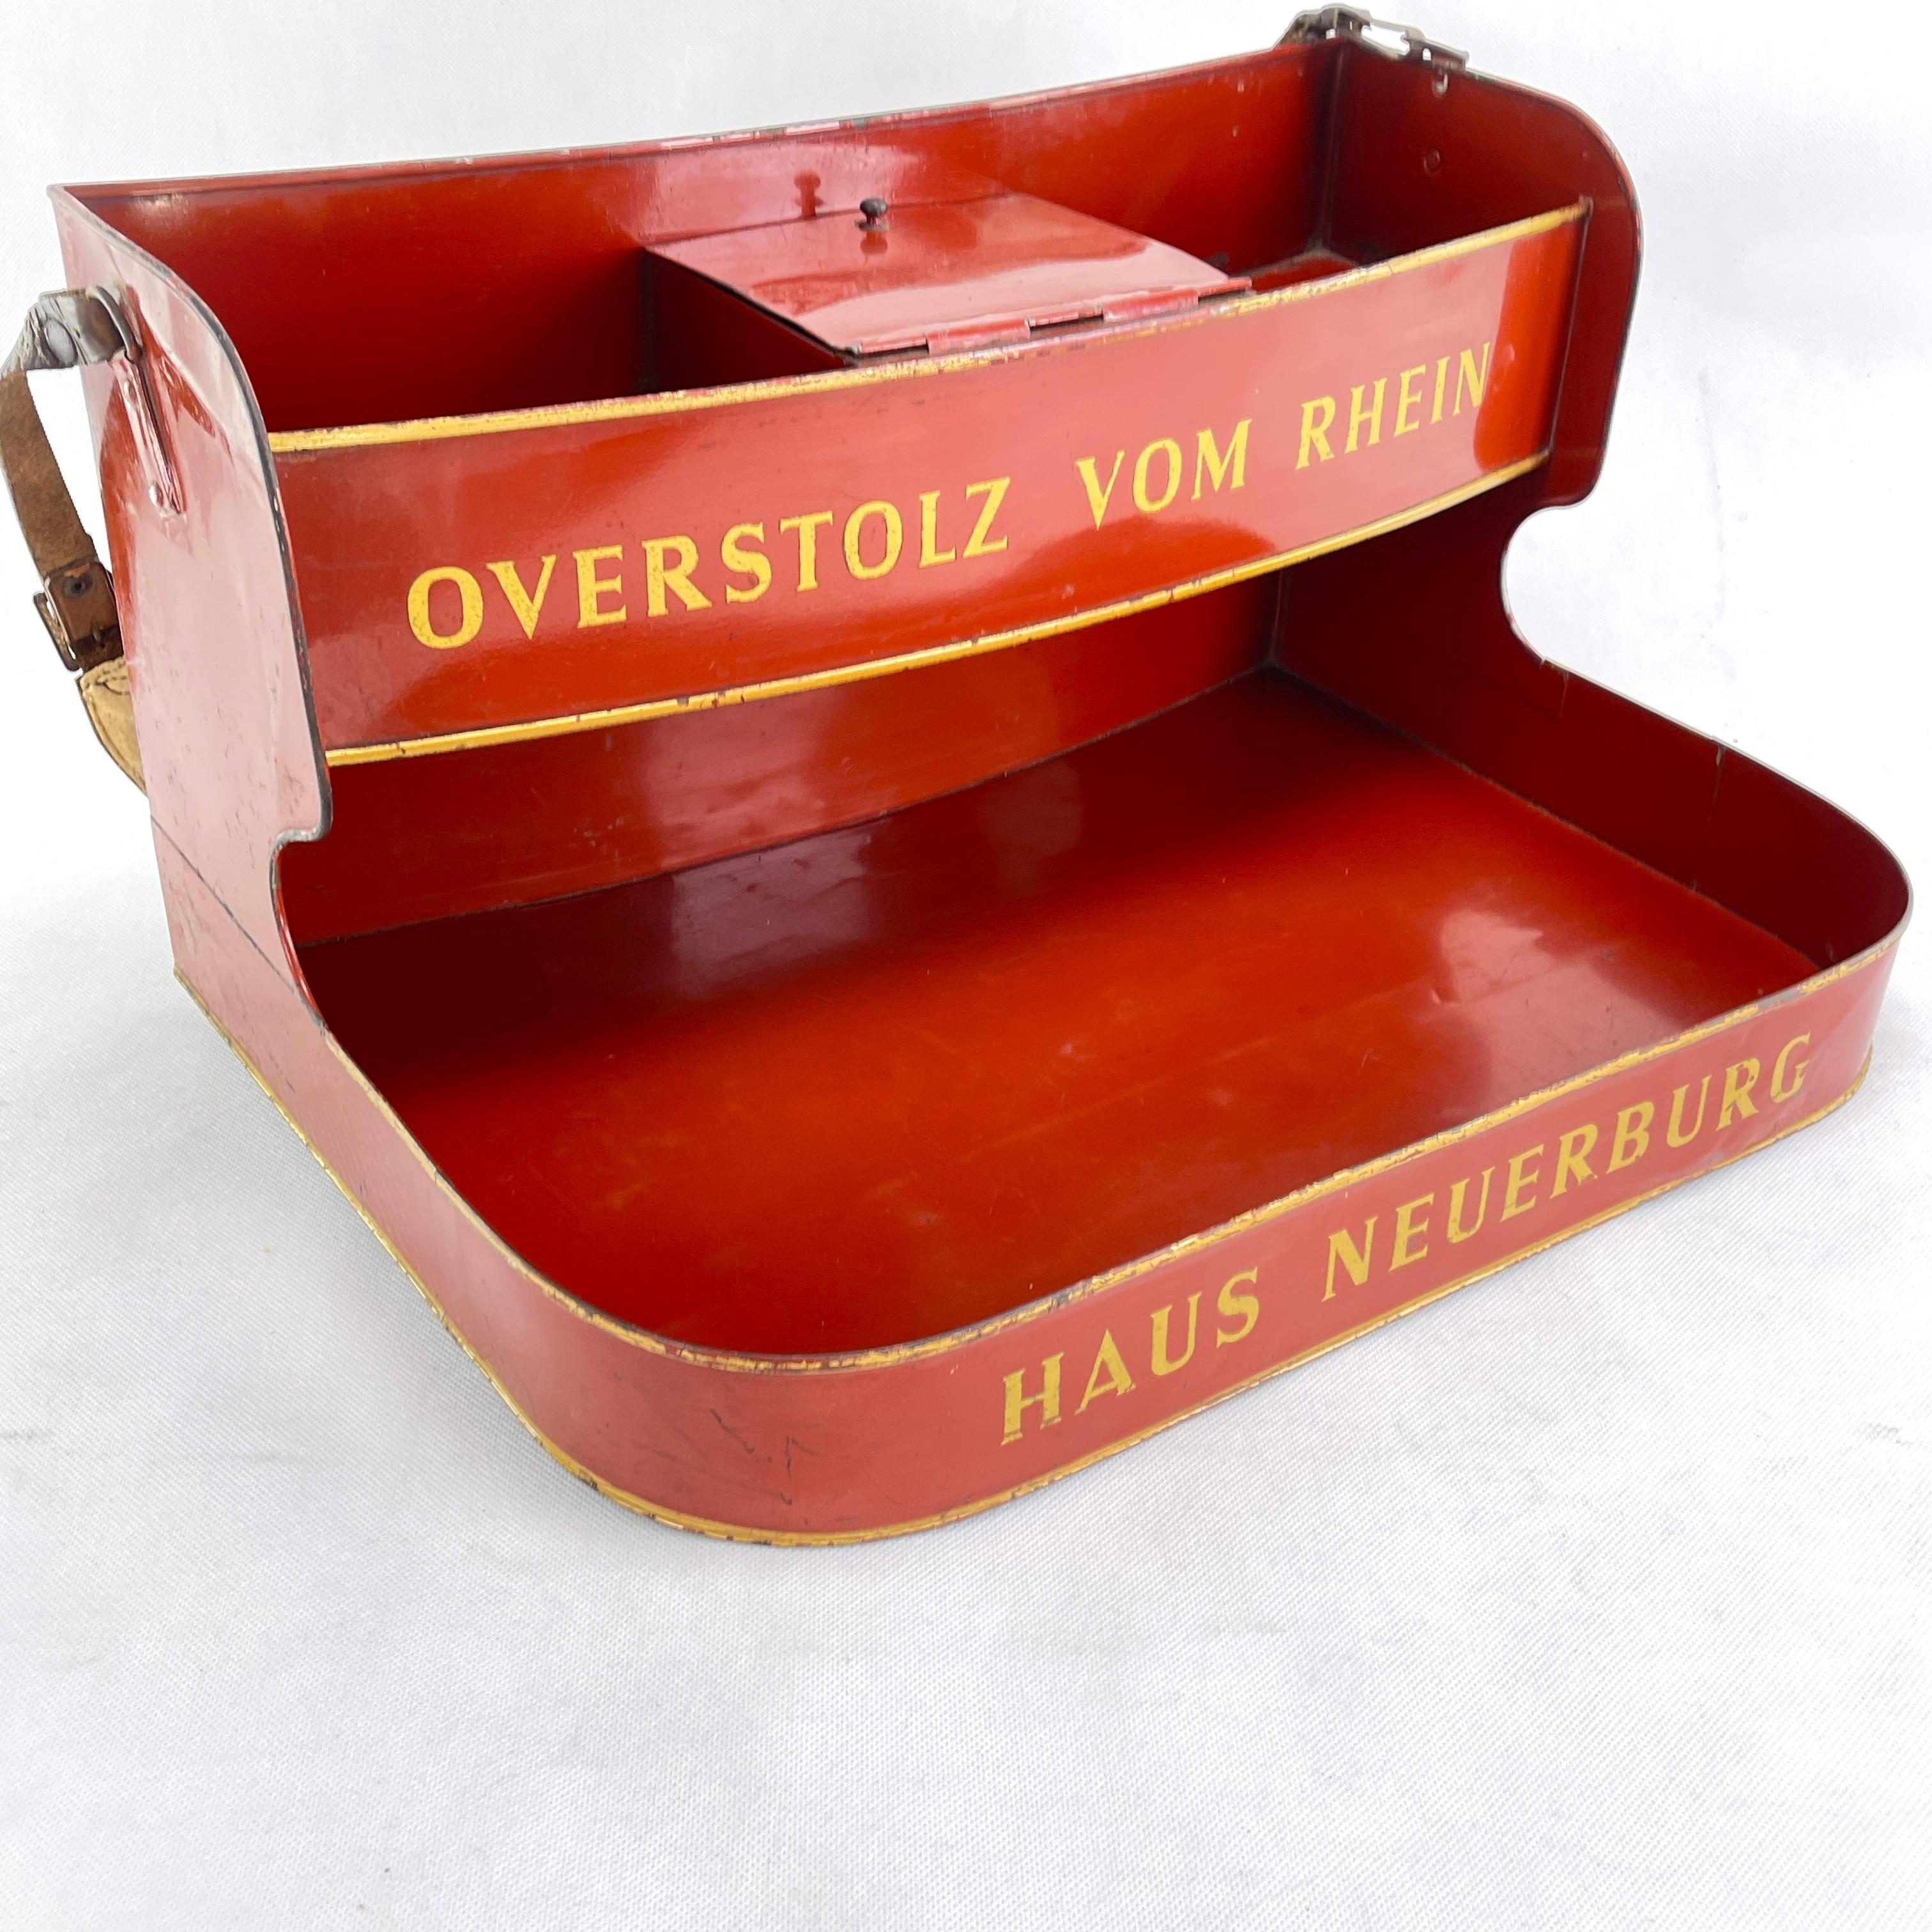 Old OVERSTOLZ Cigarettes Vendor's Tray - 1960s

The vintage vendor's tray by the OVERSTOLZ company from the Rhine is a real treasure for lovers of retro accessories and collectors of historical promotional items. This unique vendor's tray takes you